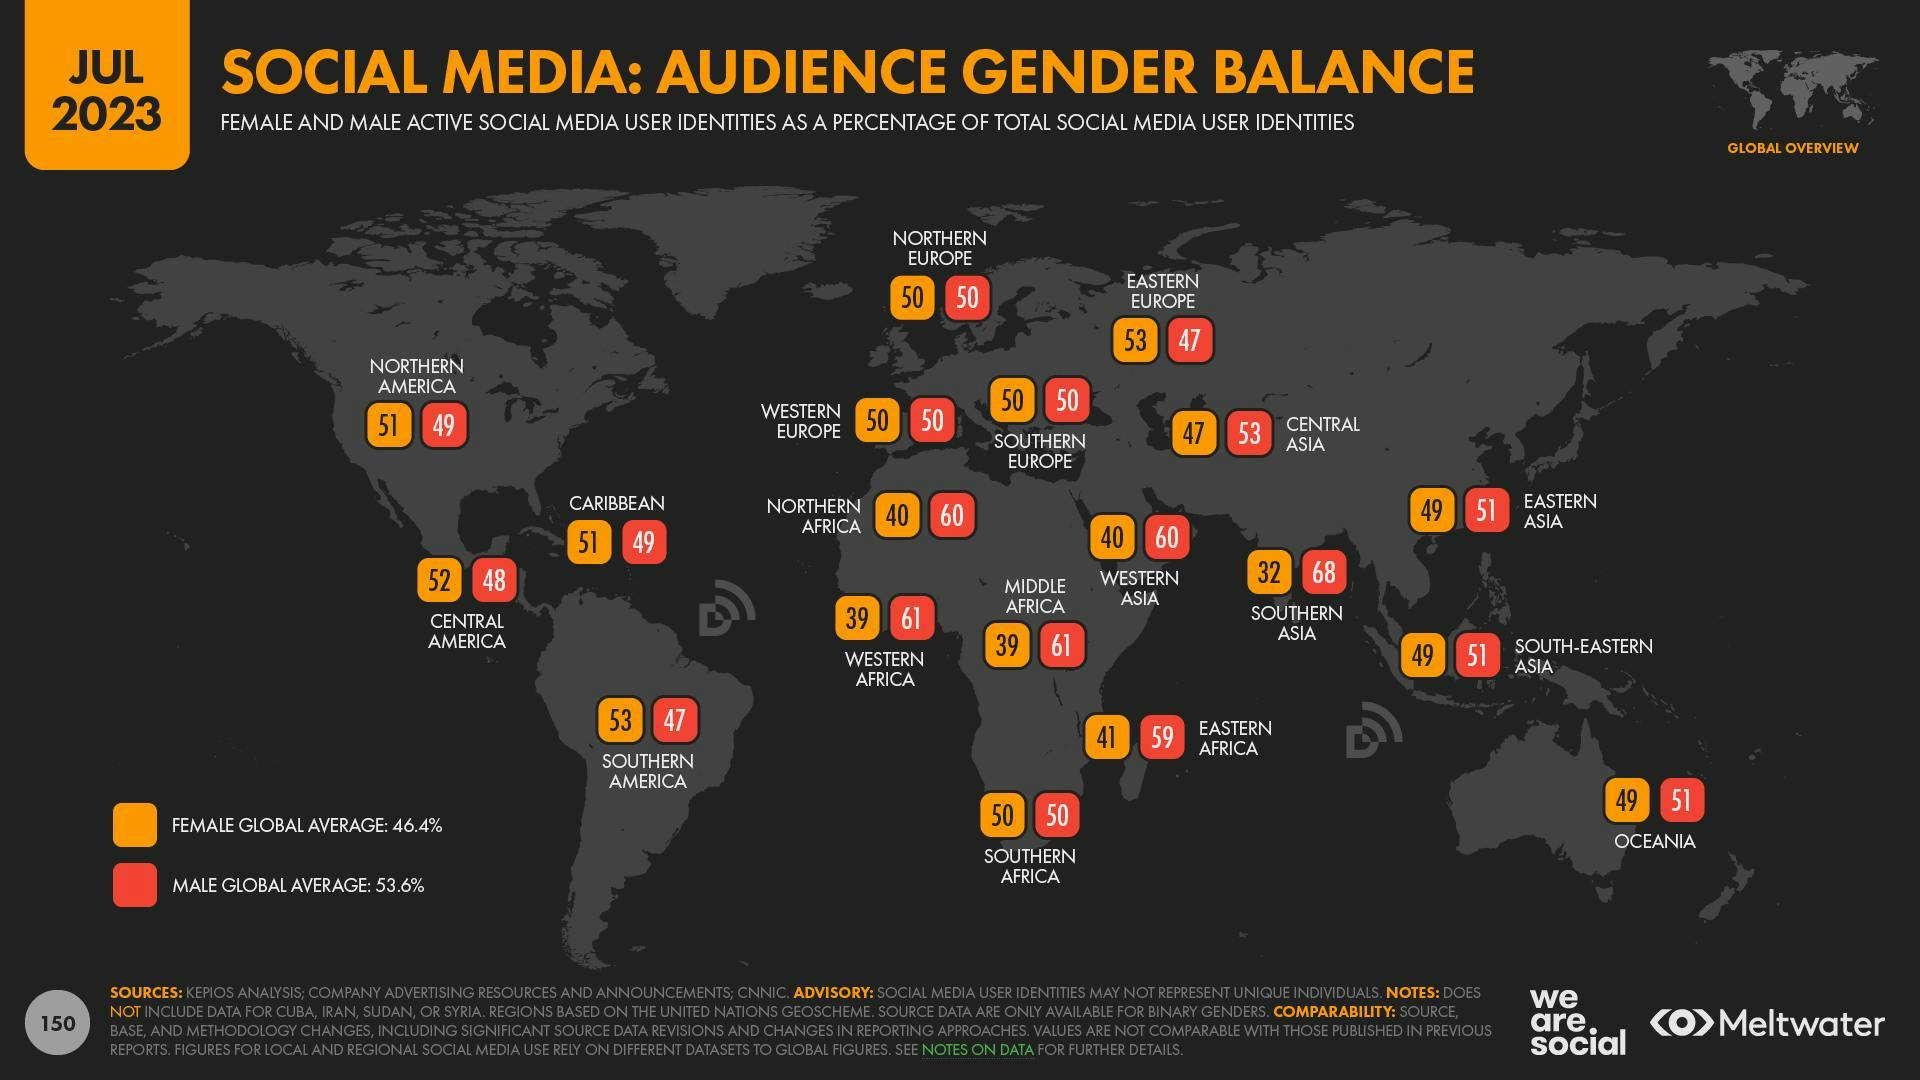 A map showing the social media user identity gender balance across geographical regions. The global average gender balance is 46.4% female to 53.6% male.